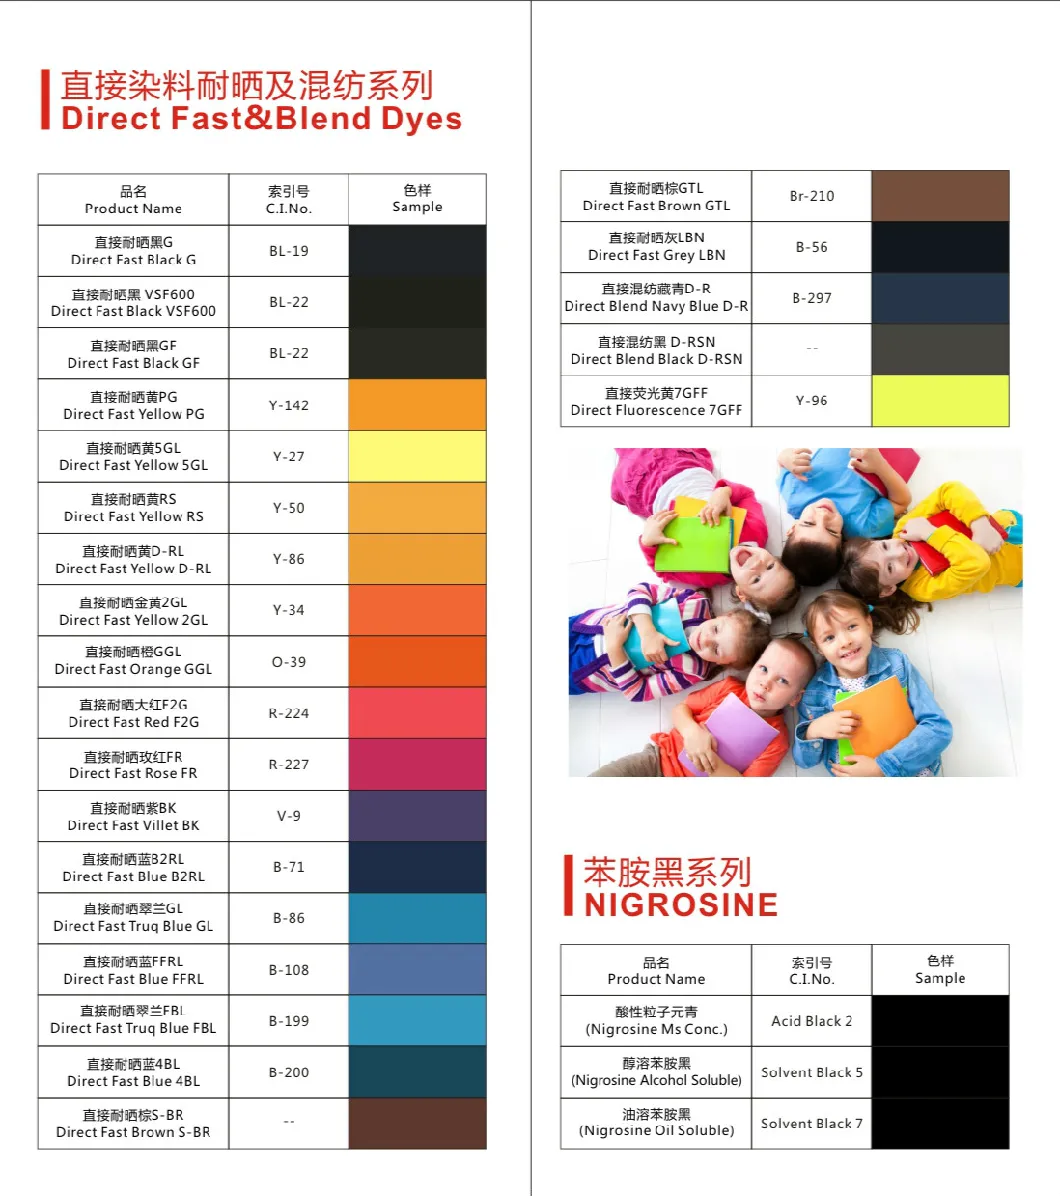 200% Direct Black 38, Direct Black Bn for Textile Leather Dyeing